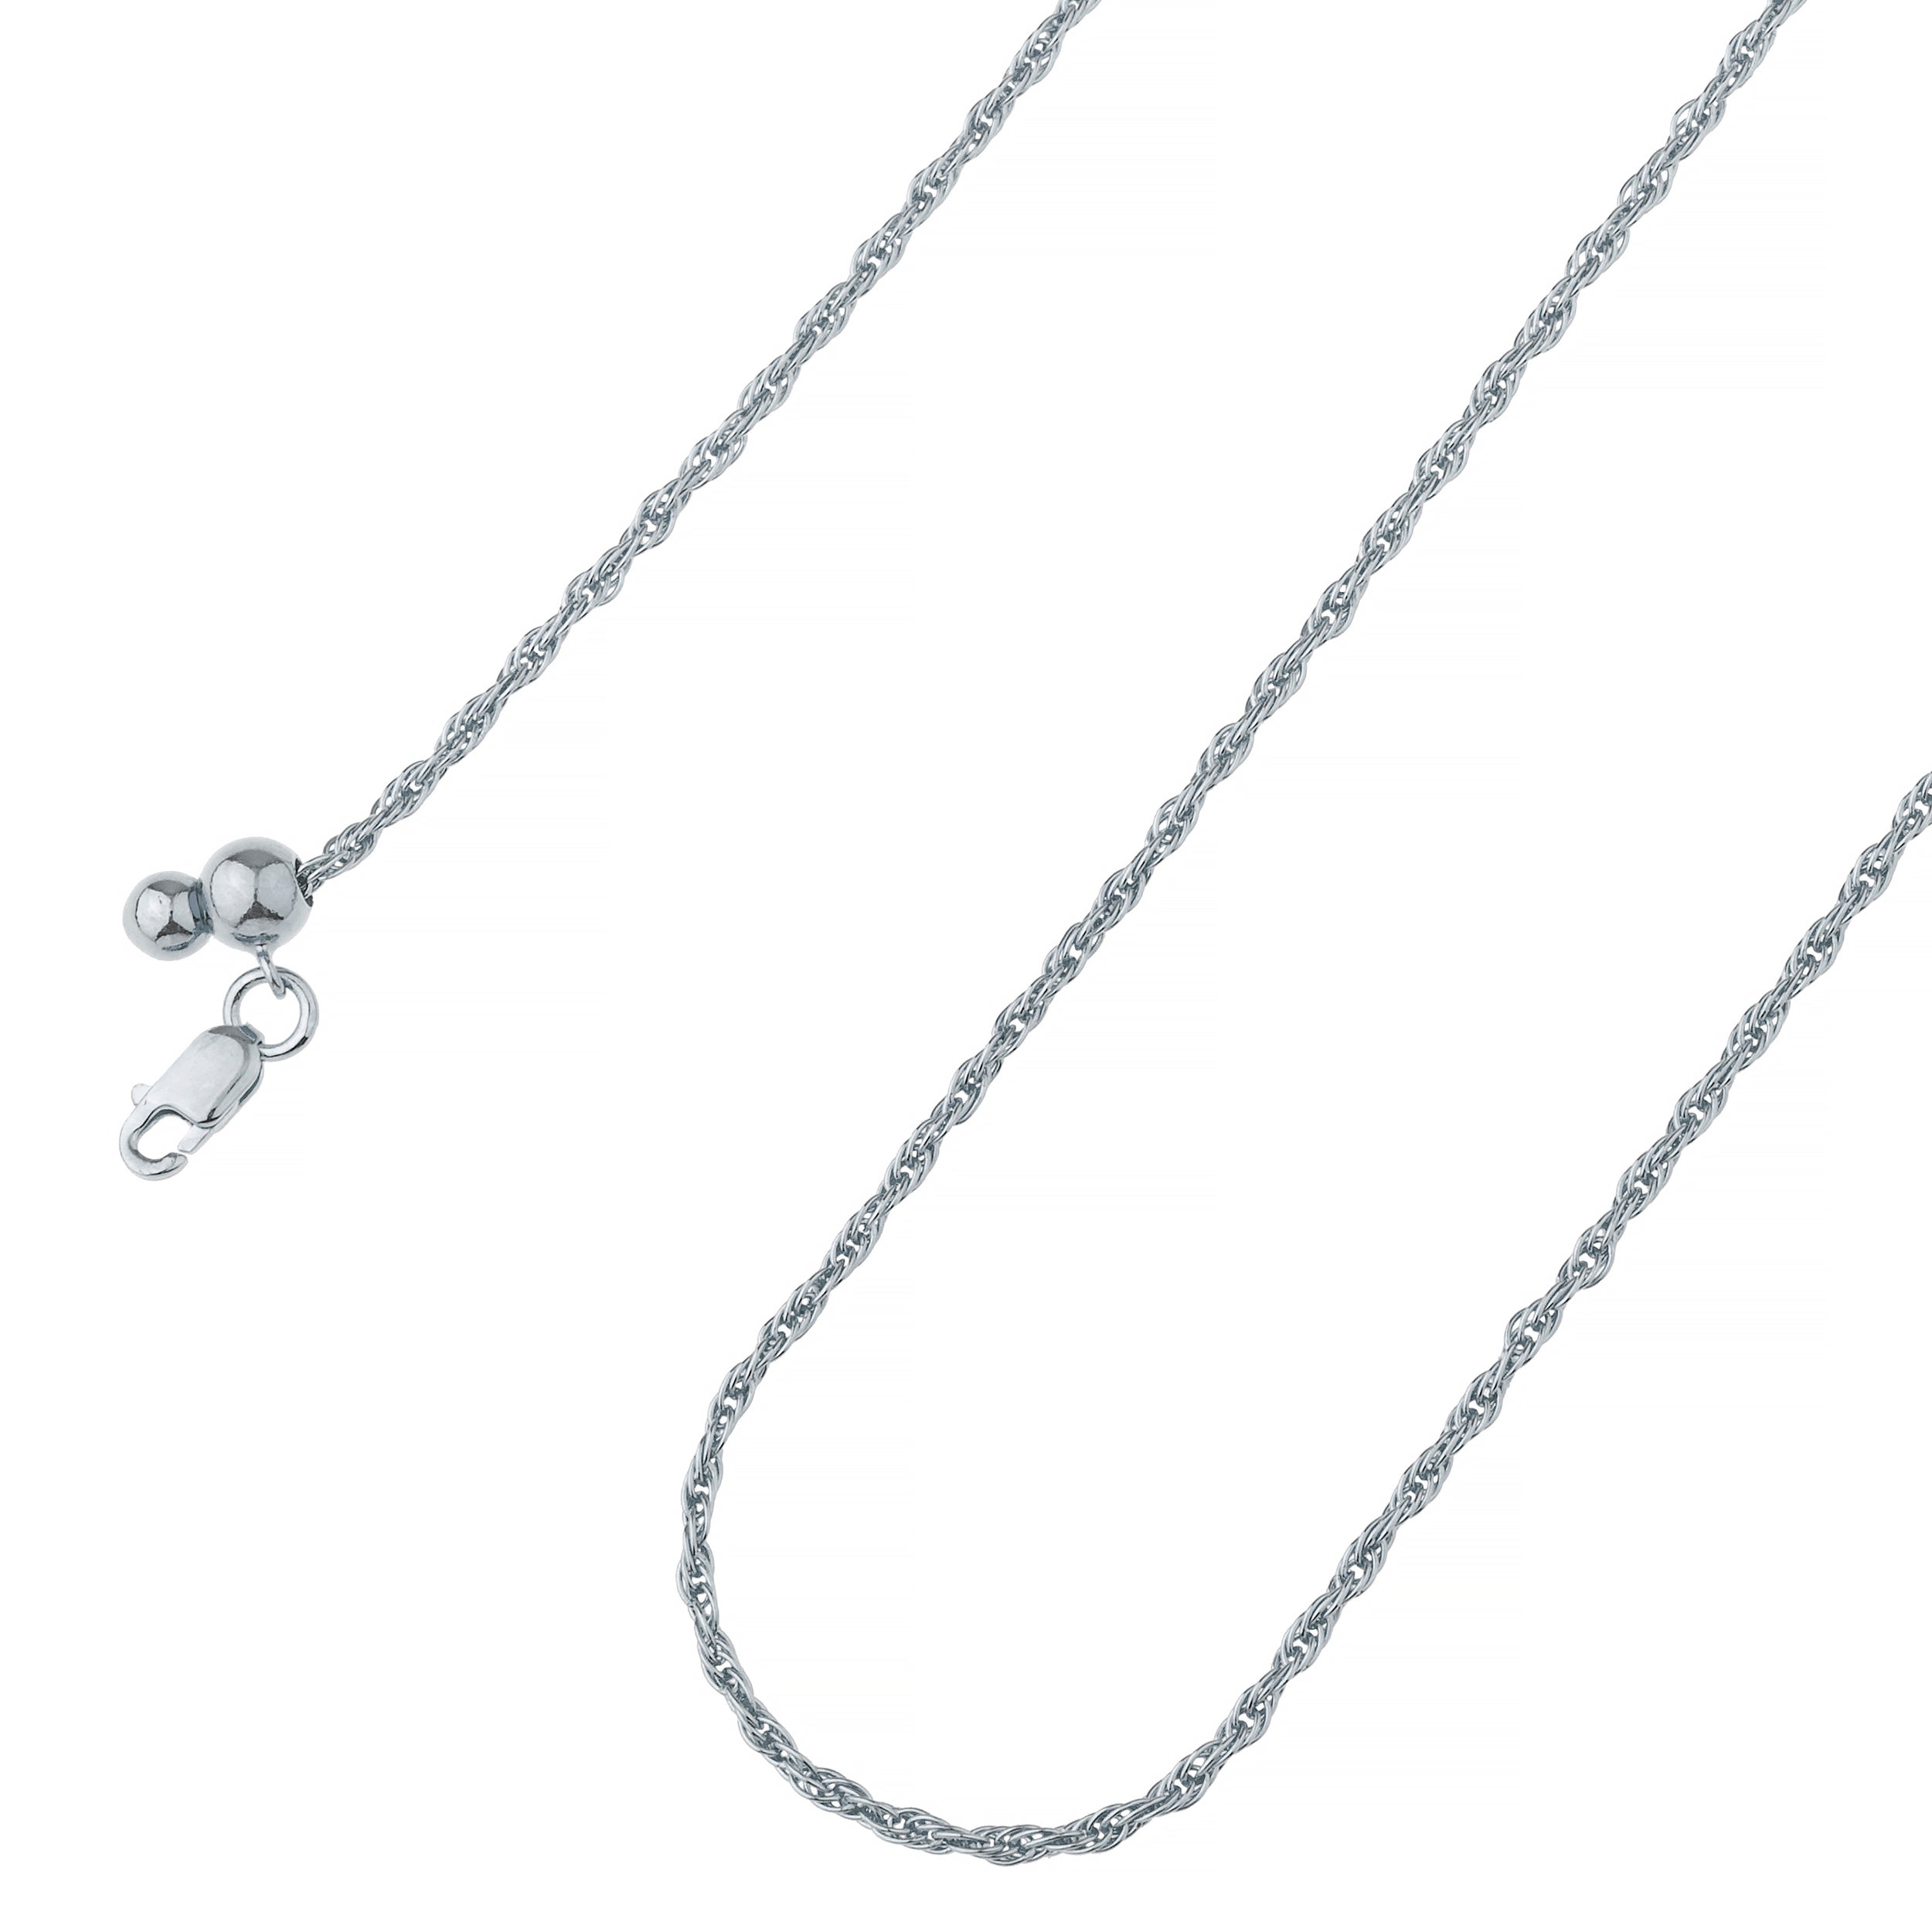 Rhodium Plated Sterling Silver Chain, Bulk Chain, Cable Flat Oval 2.5 by  2mm 3 Feet SKU:101022RH 